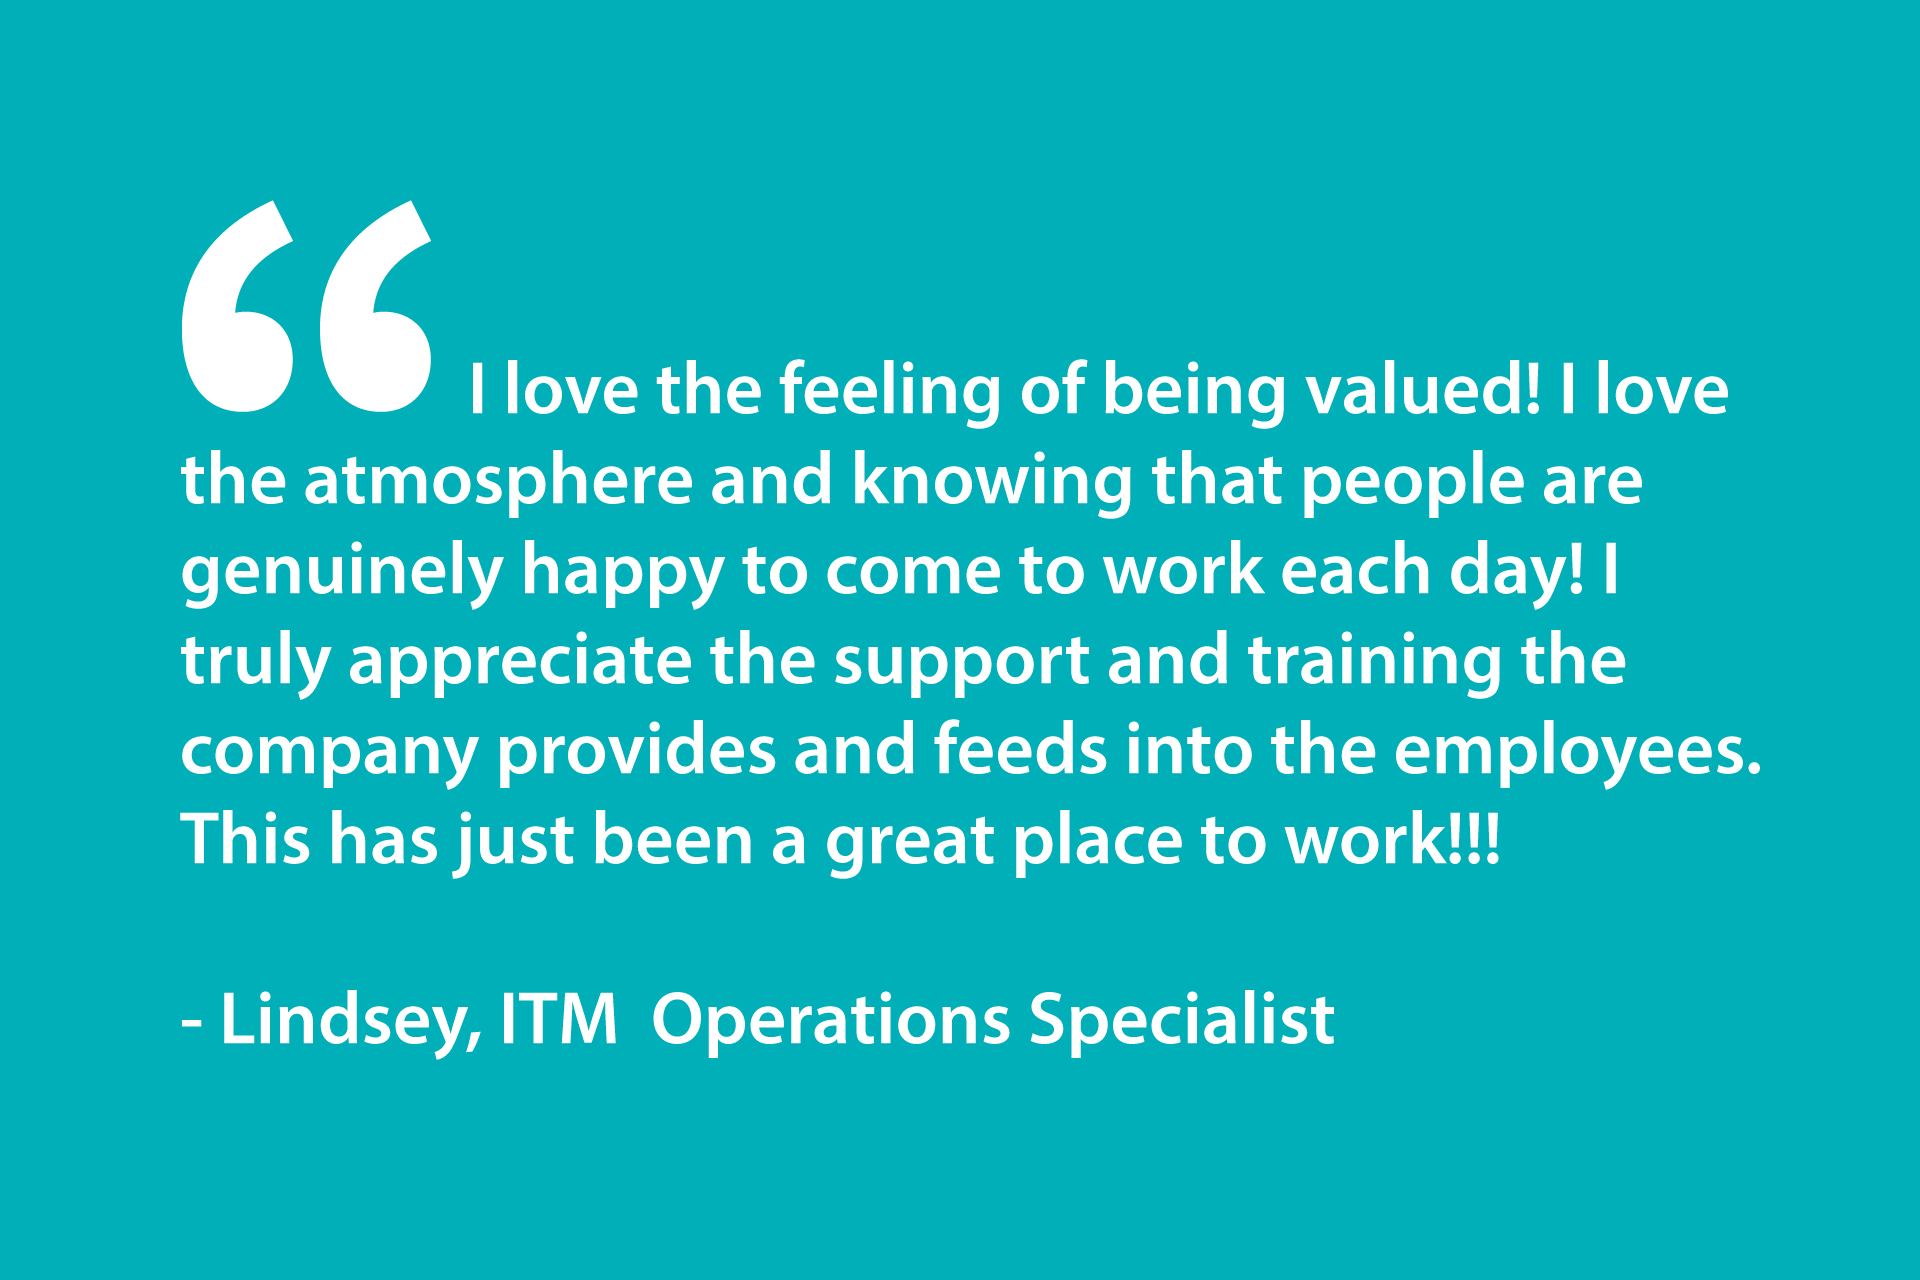 I love the feeling of being valued! I love the atmosphere and knowing that people are genuinely happy to come to work each day! I truly appreciate the support and training the company provides and feeds into the employees. This has just been a great place to work!!! - Lindsey, ITM Operations Specialist